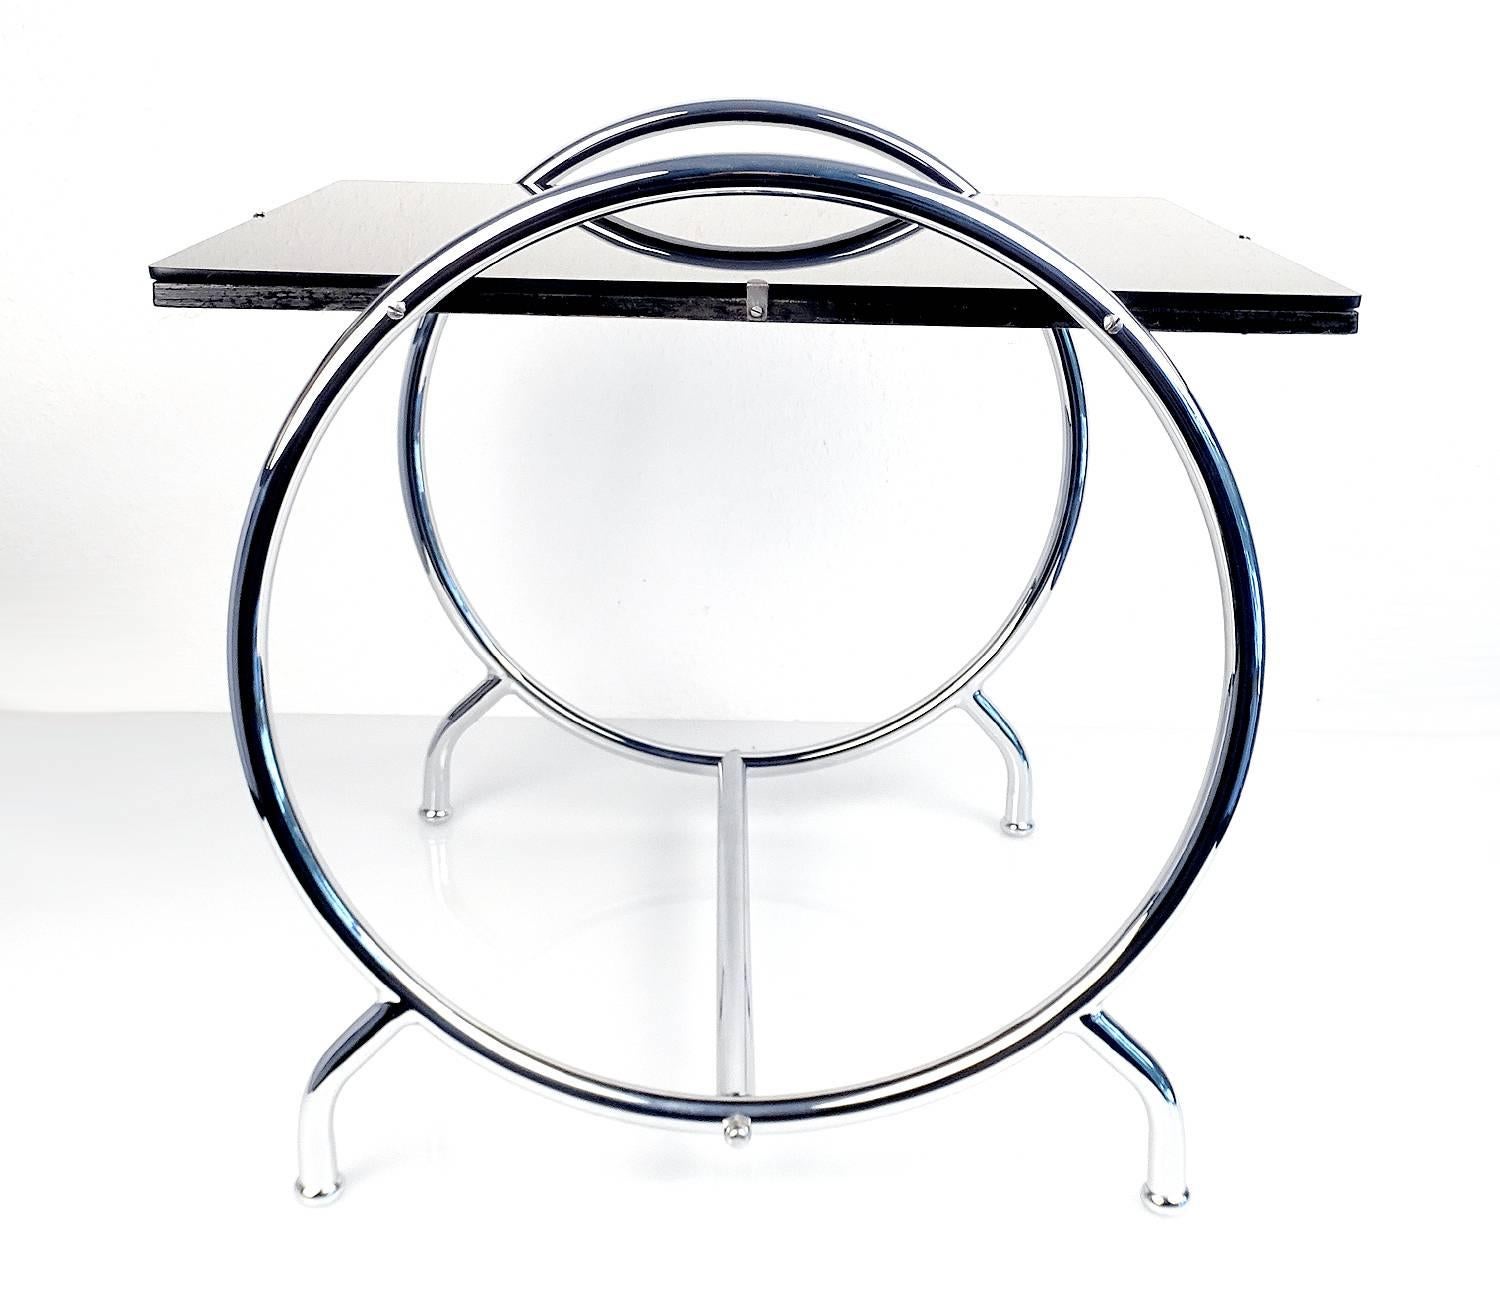 Very elegant Bauhaus Machine Age Era tubular design table circa 1935, very rare round shape, reverse enameled glass on wooden top, rechromed base

The Art Deco style name was derived from the Exposition Internationale des Arts Décoratifs et